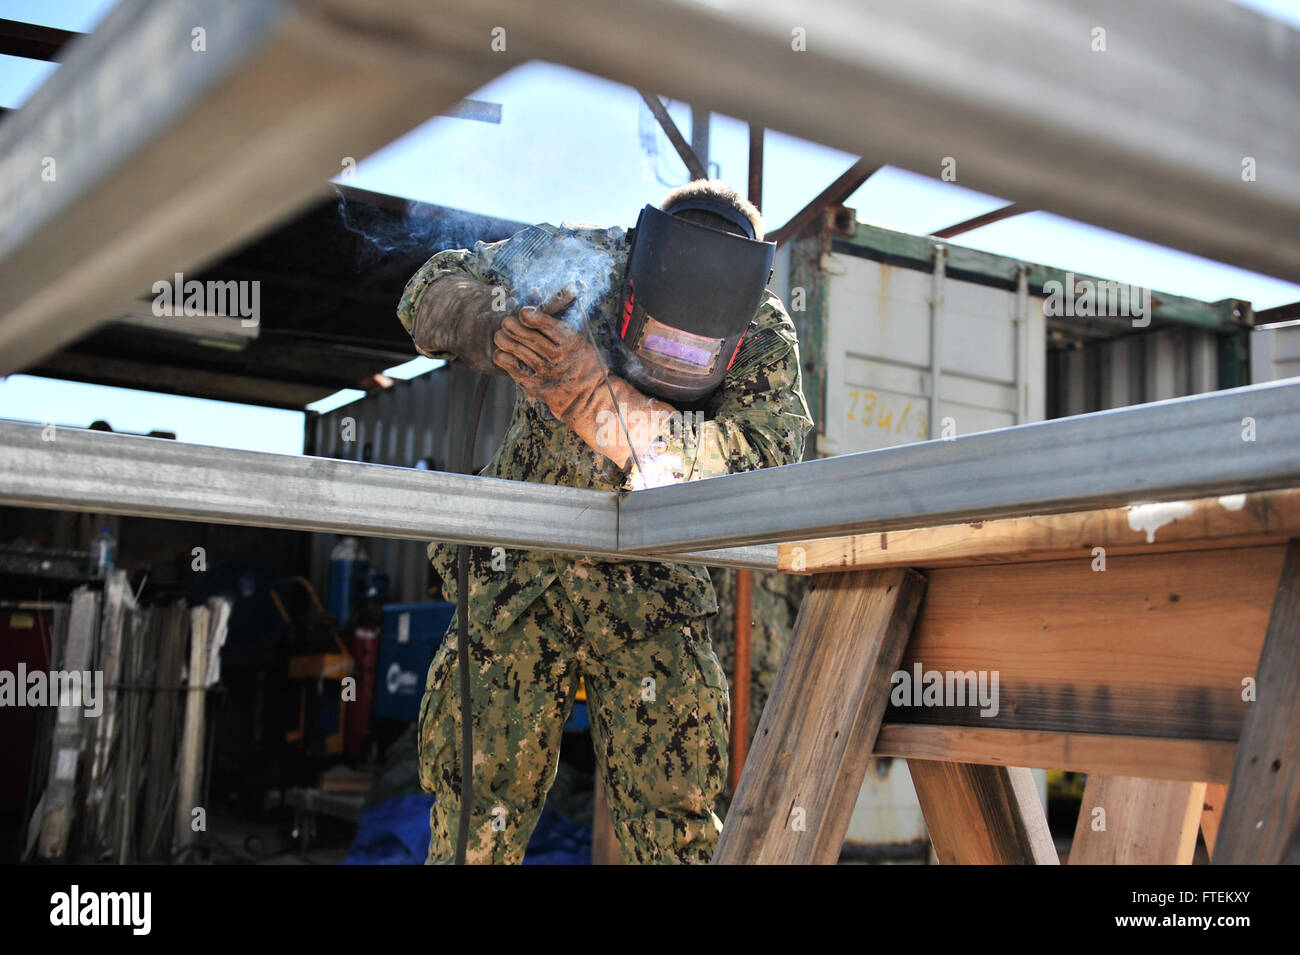 NAVAL STATION ROTA, Spain (Feb. 13, 2015) Steelworker 3rd Class Shawn Hoagland assigned to Naval Mobile Construction Battalion (NMCB) 11, welds two pieces of metal together for a door on a upcoming project Feb. 13, 2015. NMCB 11 is currently deployed to 14 different detachment sites throughout European Command, African command, Pacific Command and Central Command; promoting security and stability by conducting general engineering, disaster relief, construction readiness operations and Human civic action support. (U.S. Navy photo by Mass Communication Specialist 1st Class Mic Stock Photo